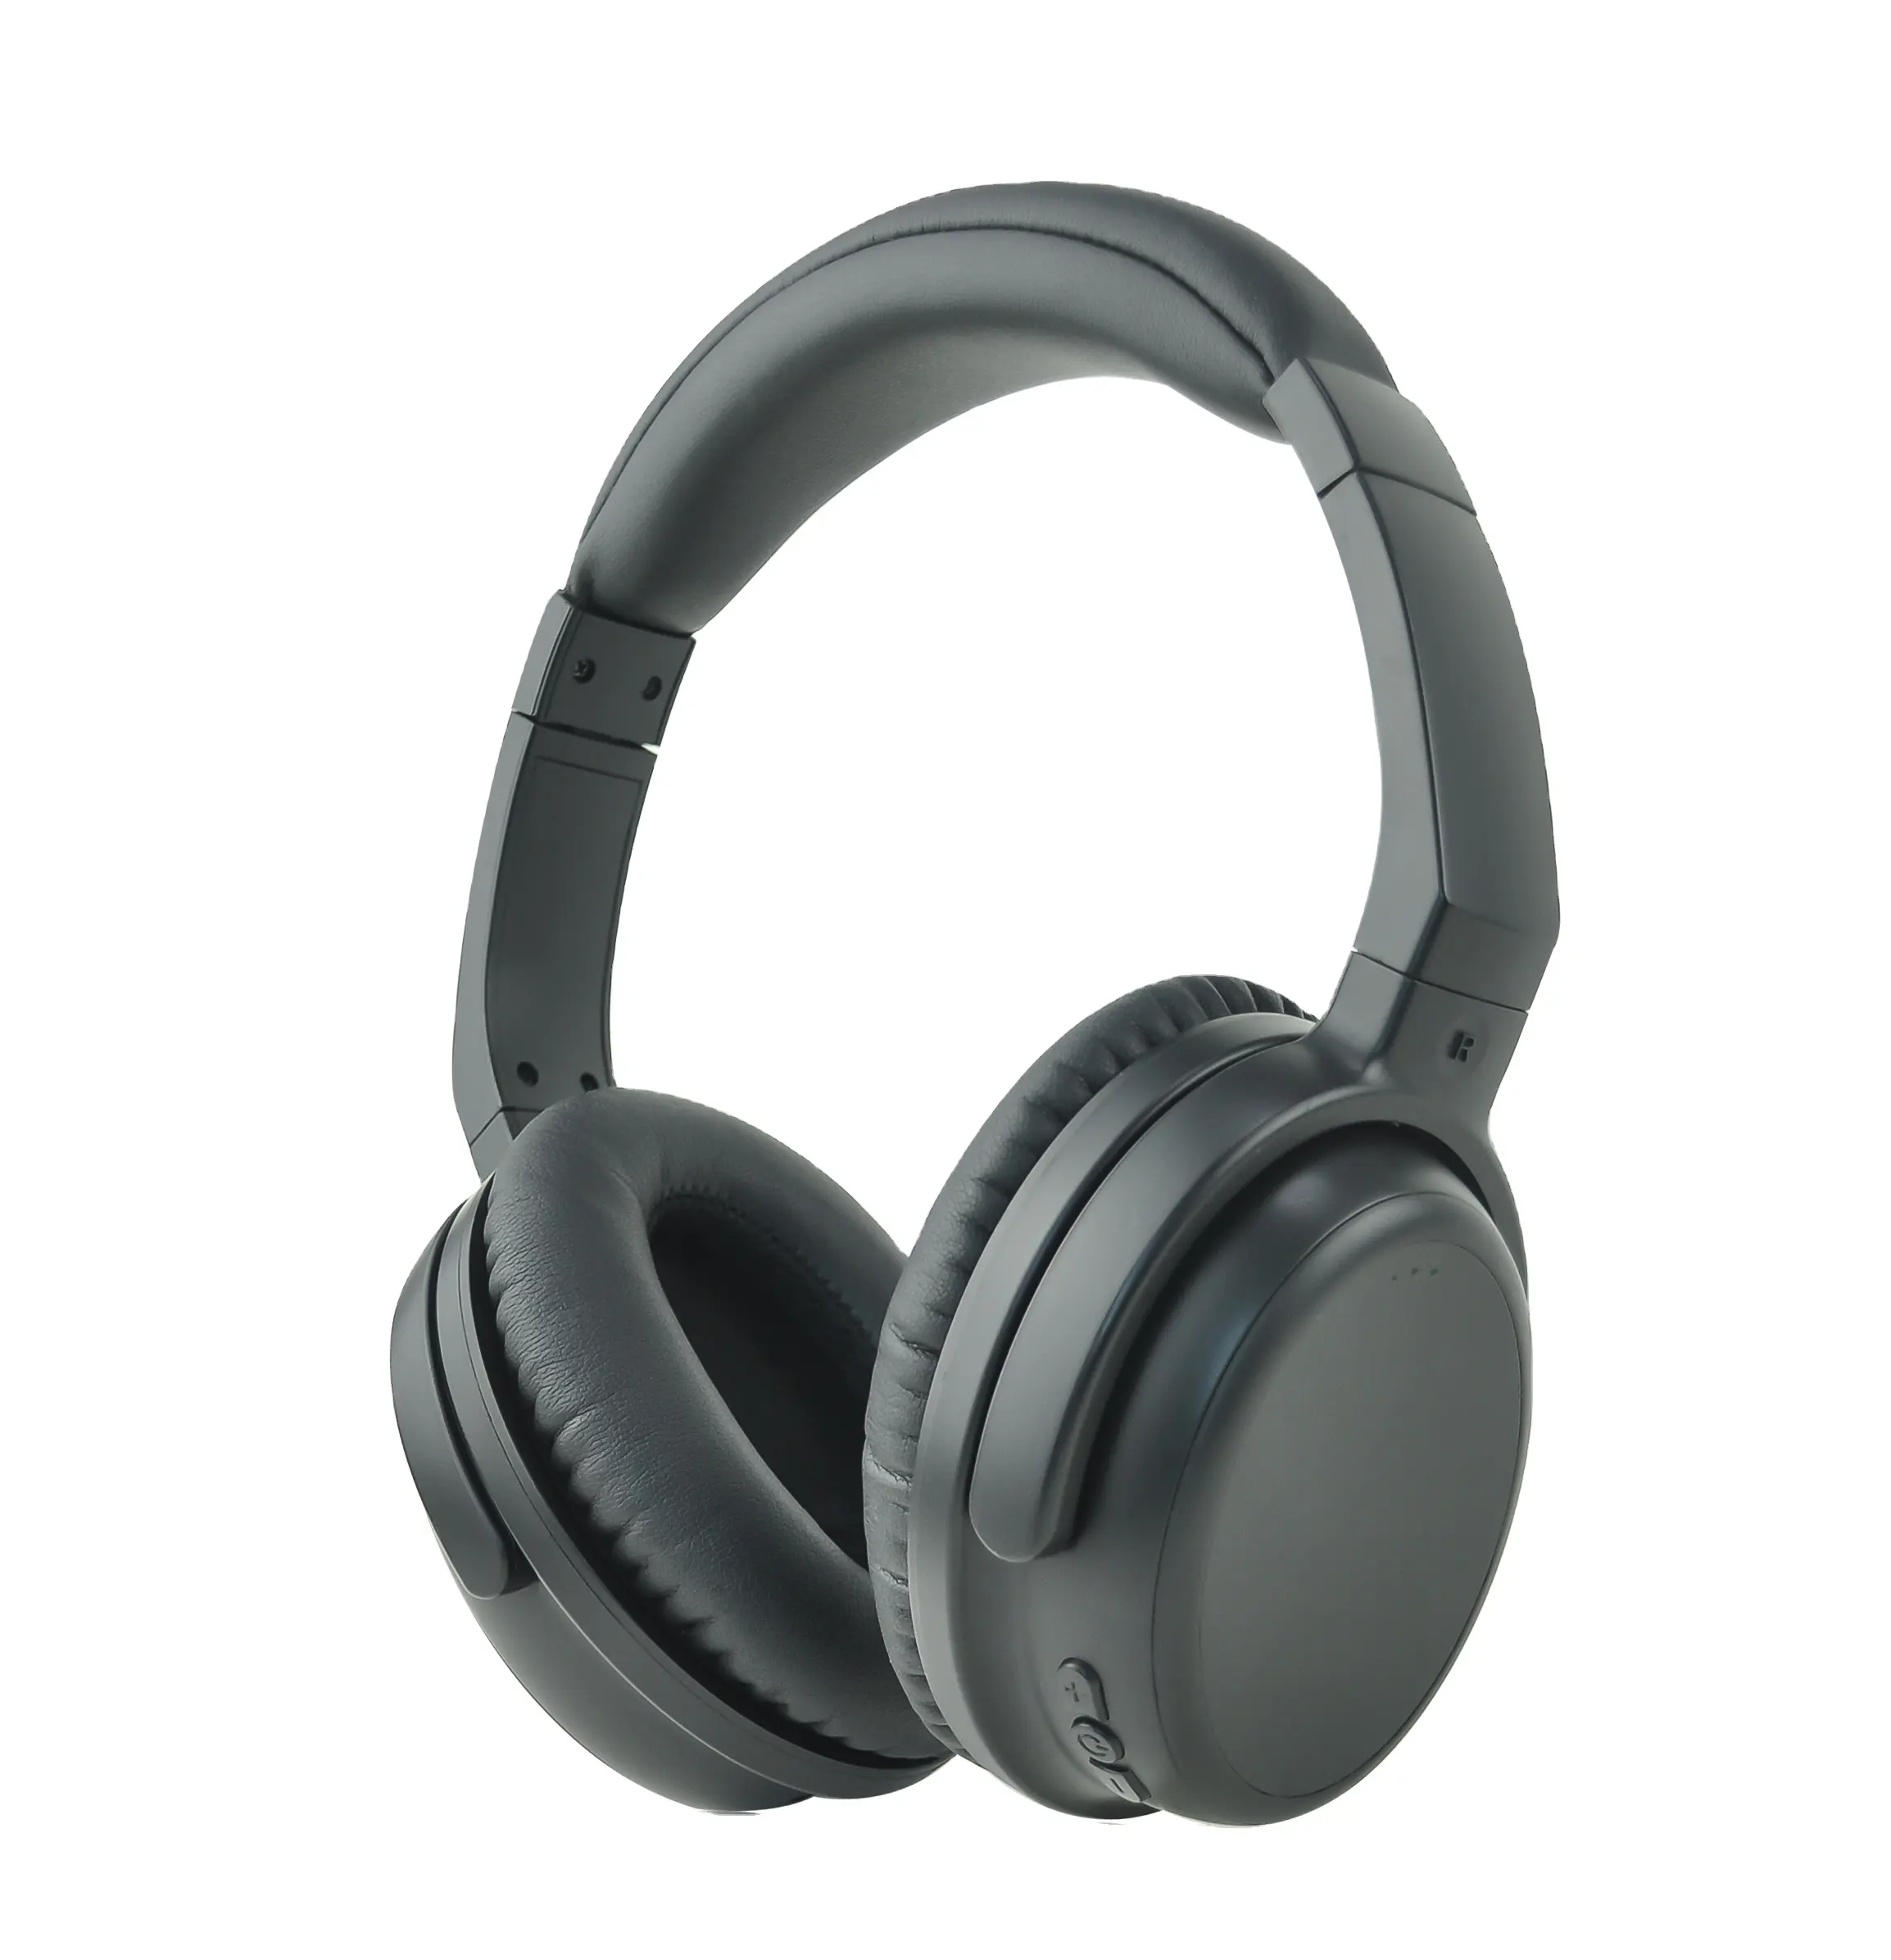 BT80 Wireless Bluetooth On-Ear Headphones with 20 hours Long Battery Life - Black